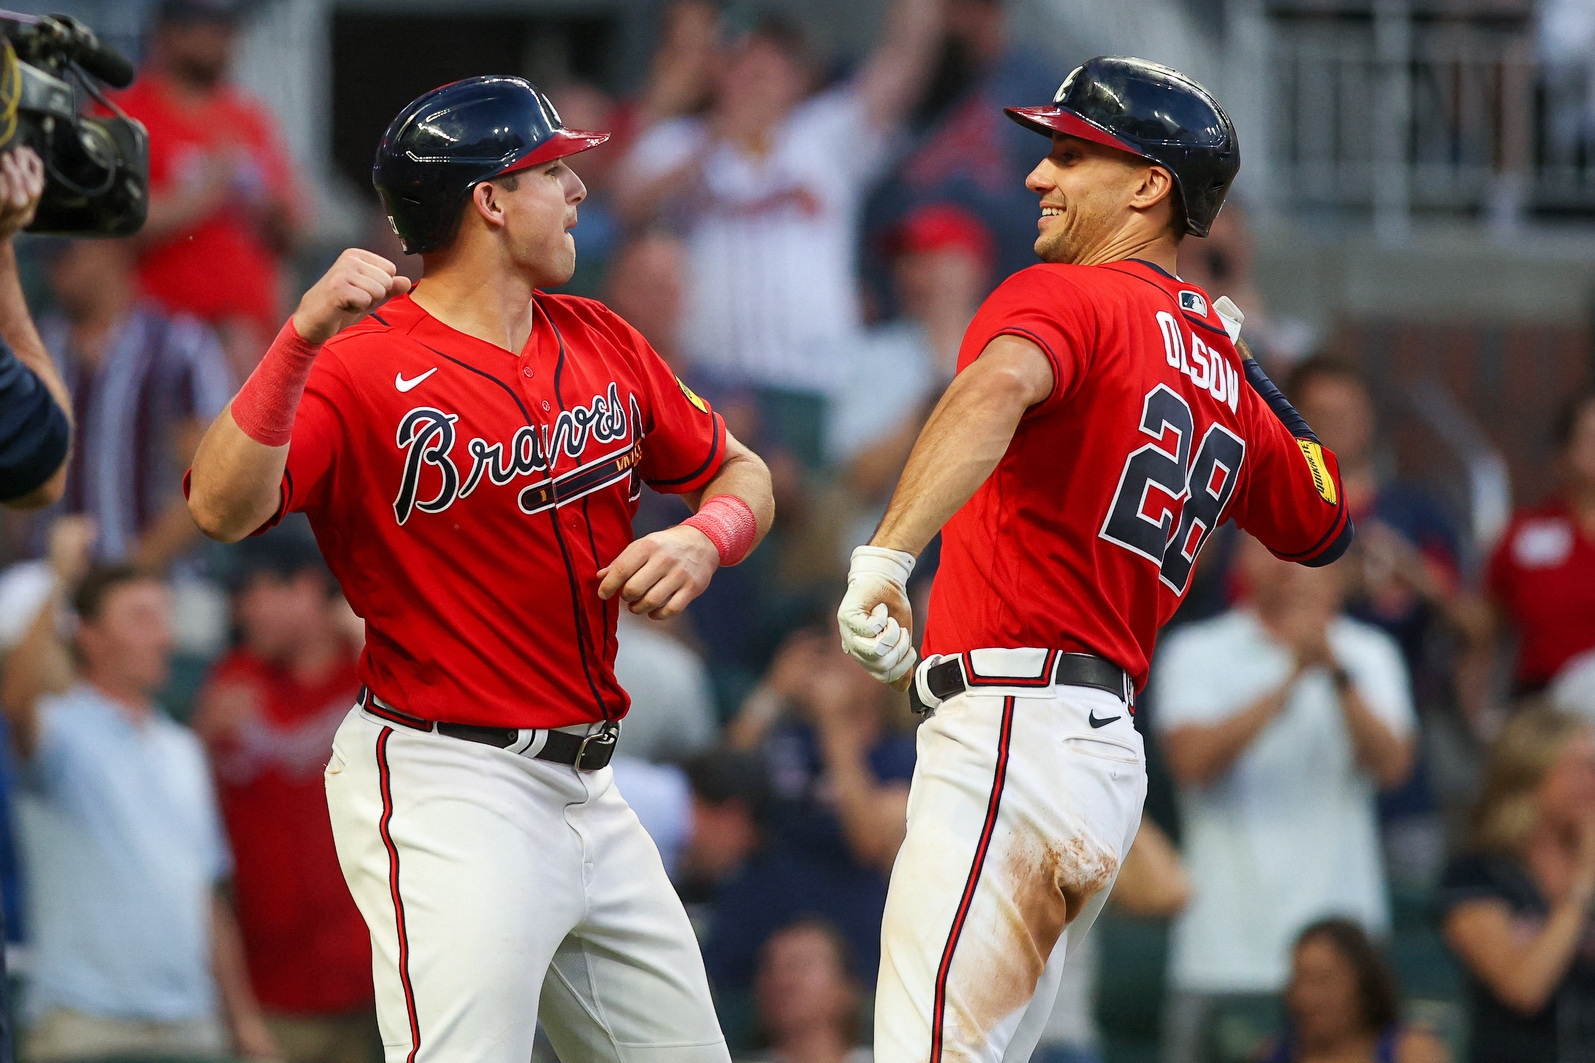 Braves sock six homers, rout Marlins for 6th straight win